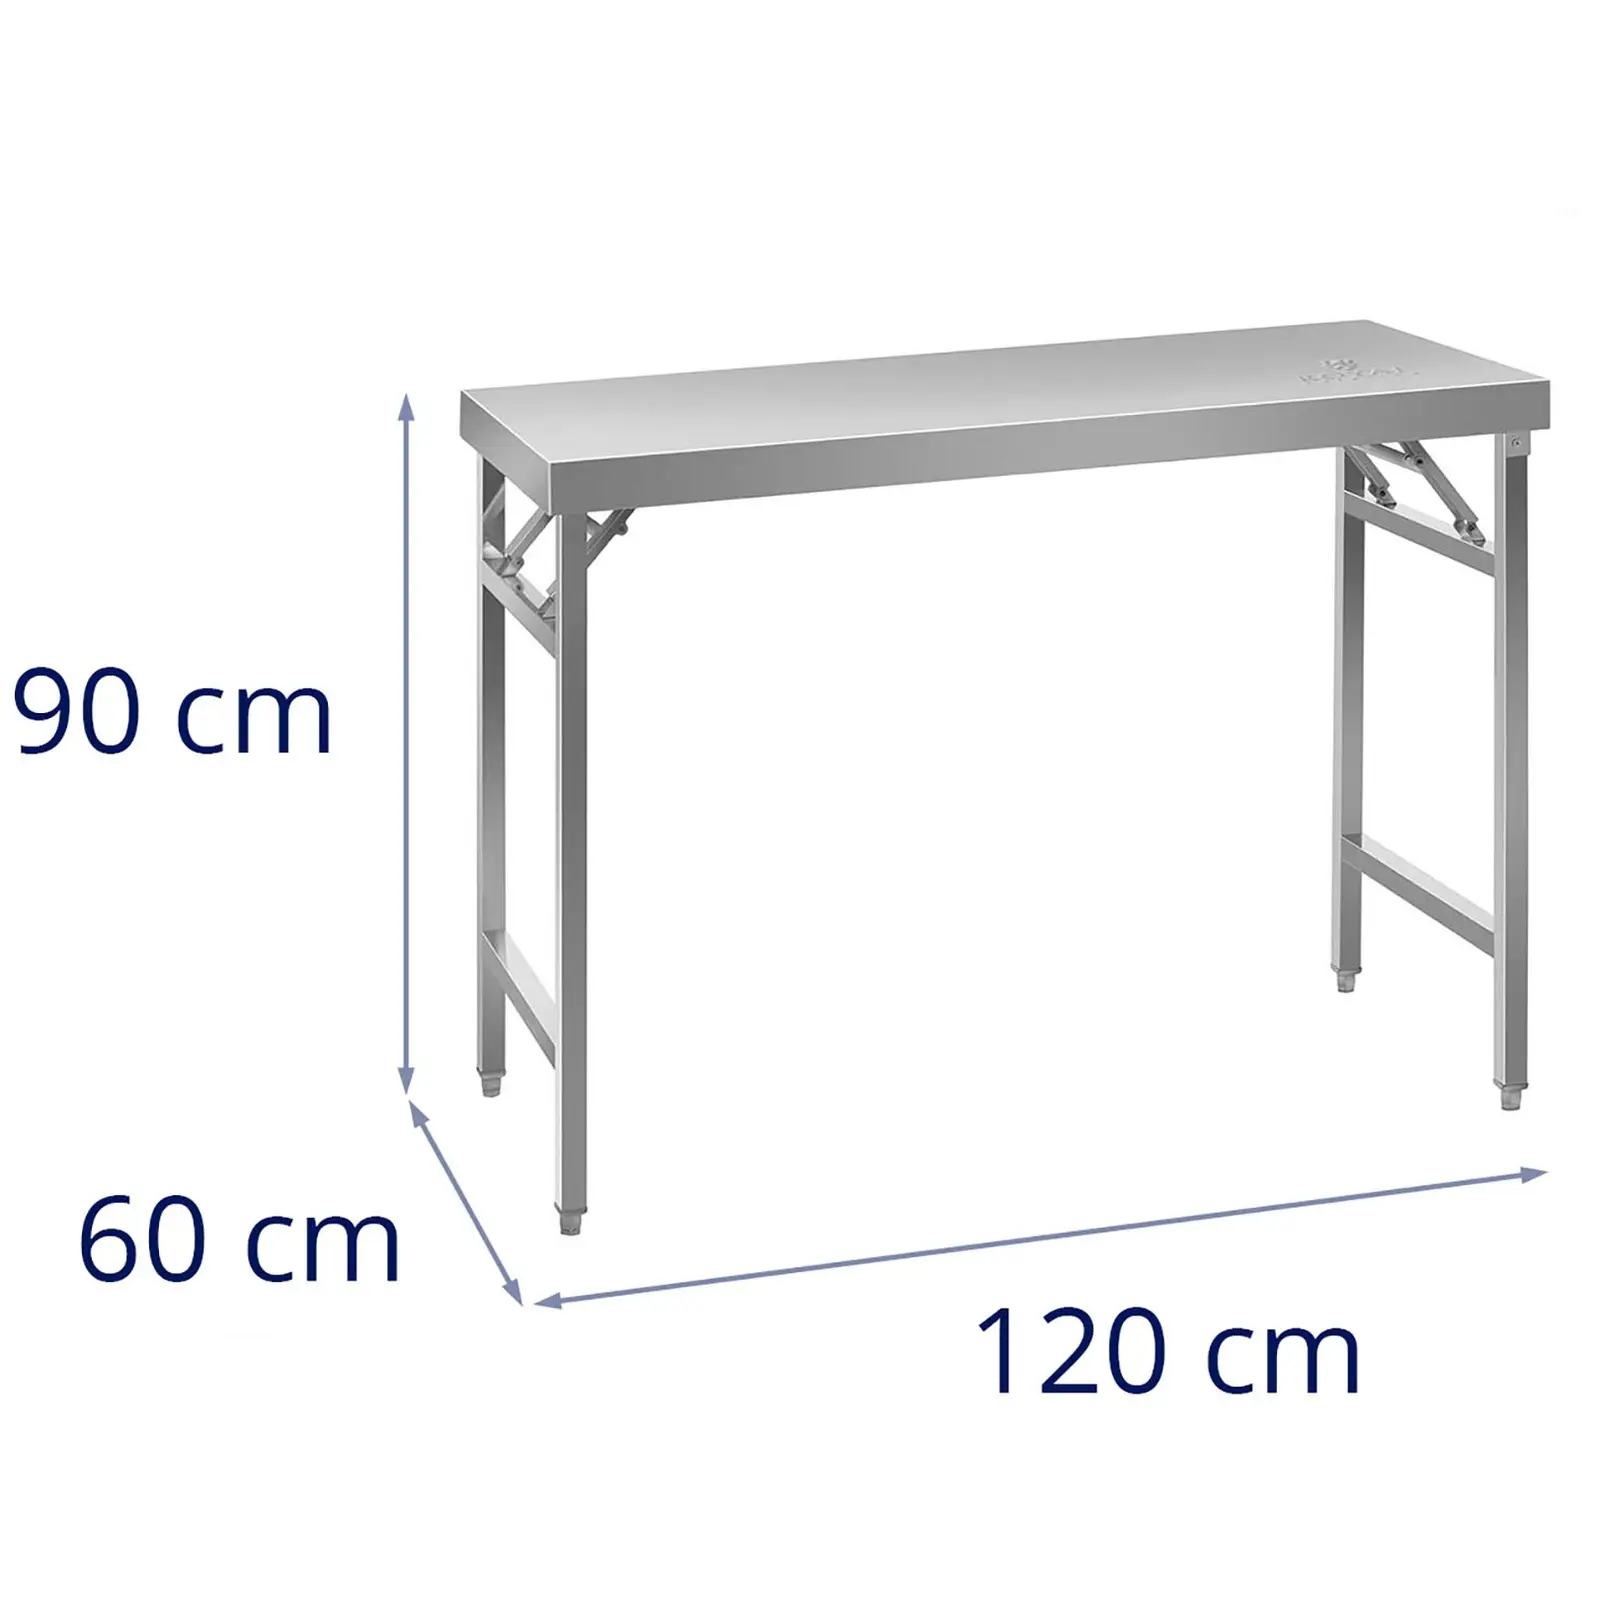 Folding Work Table - Stainless Steel - 120 x 60 cm